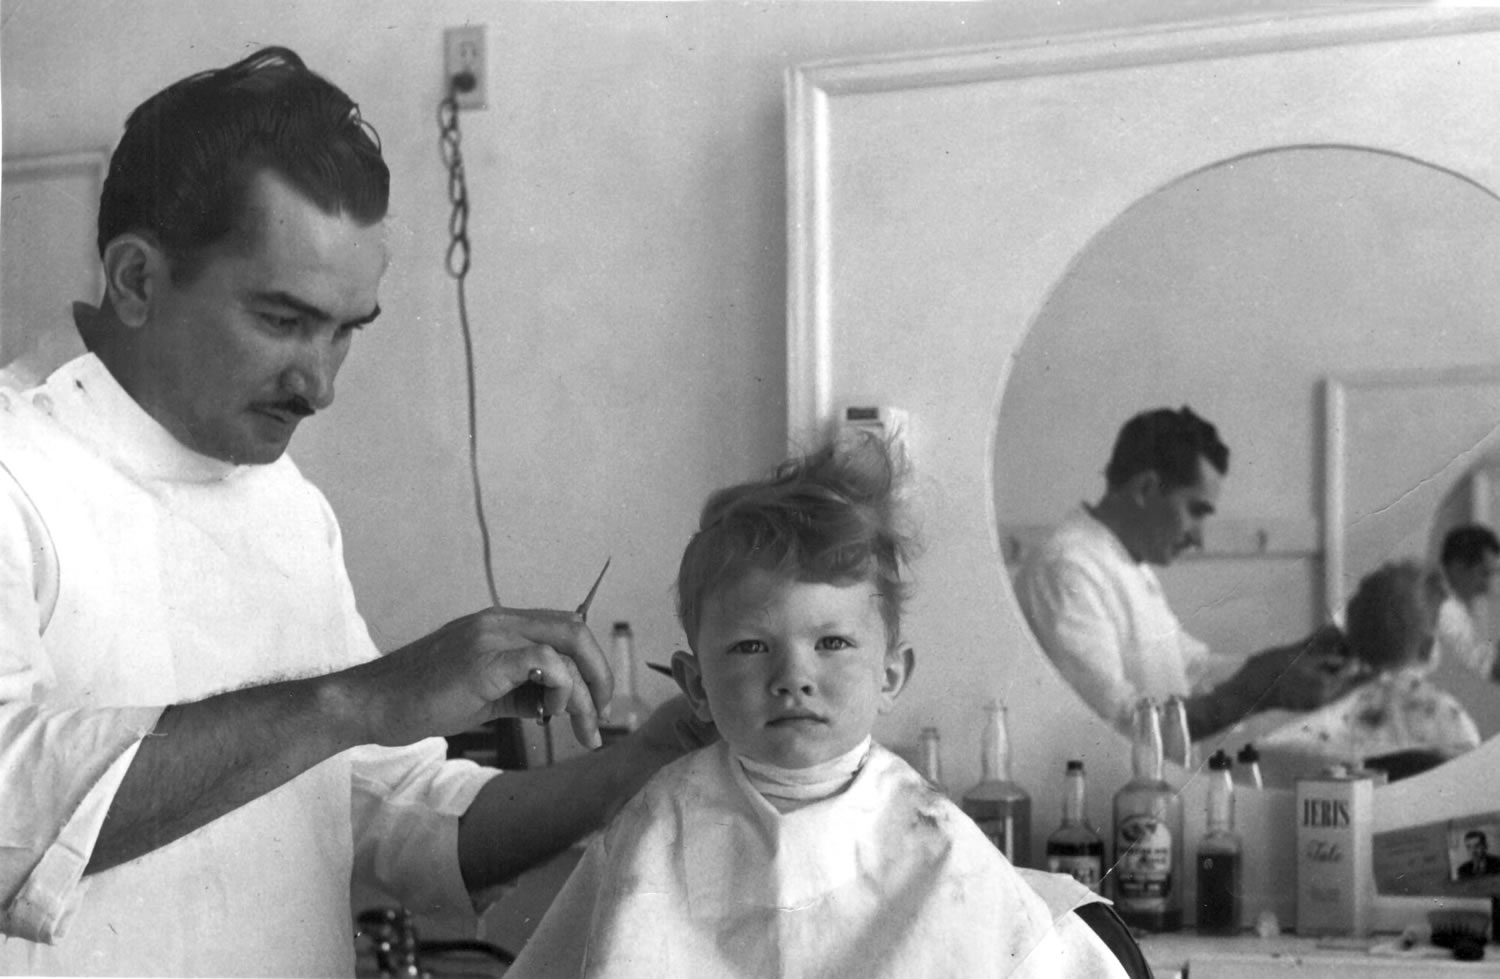 Cecil Wright cuts the hair of a boy whose last name is Potter in August 1947.